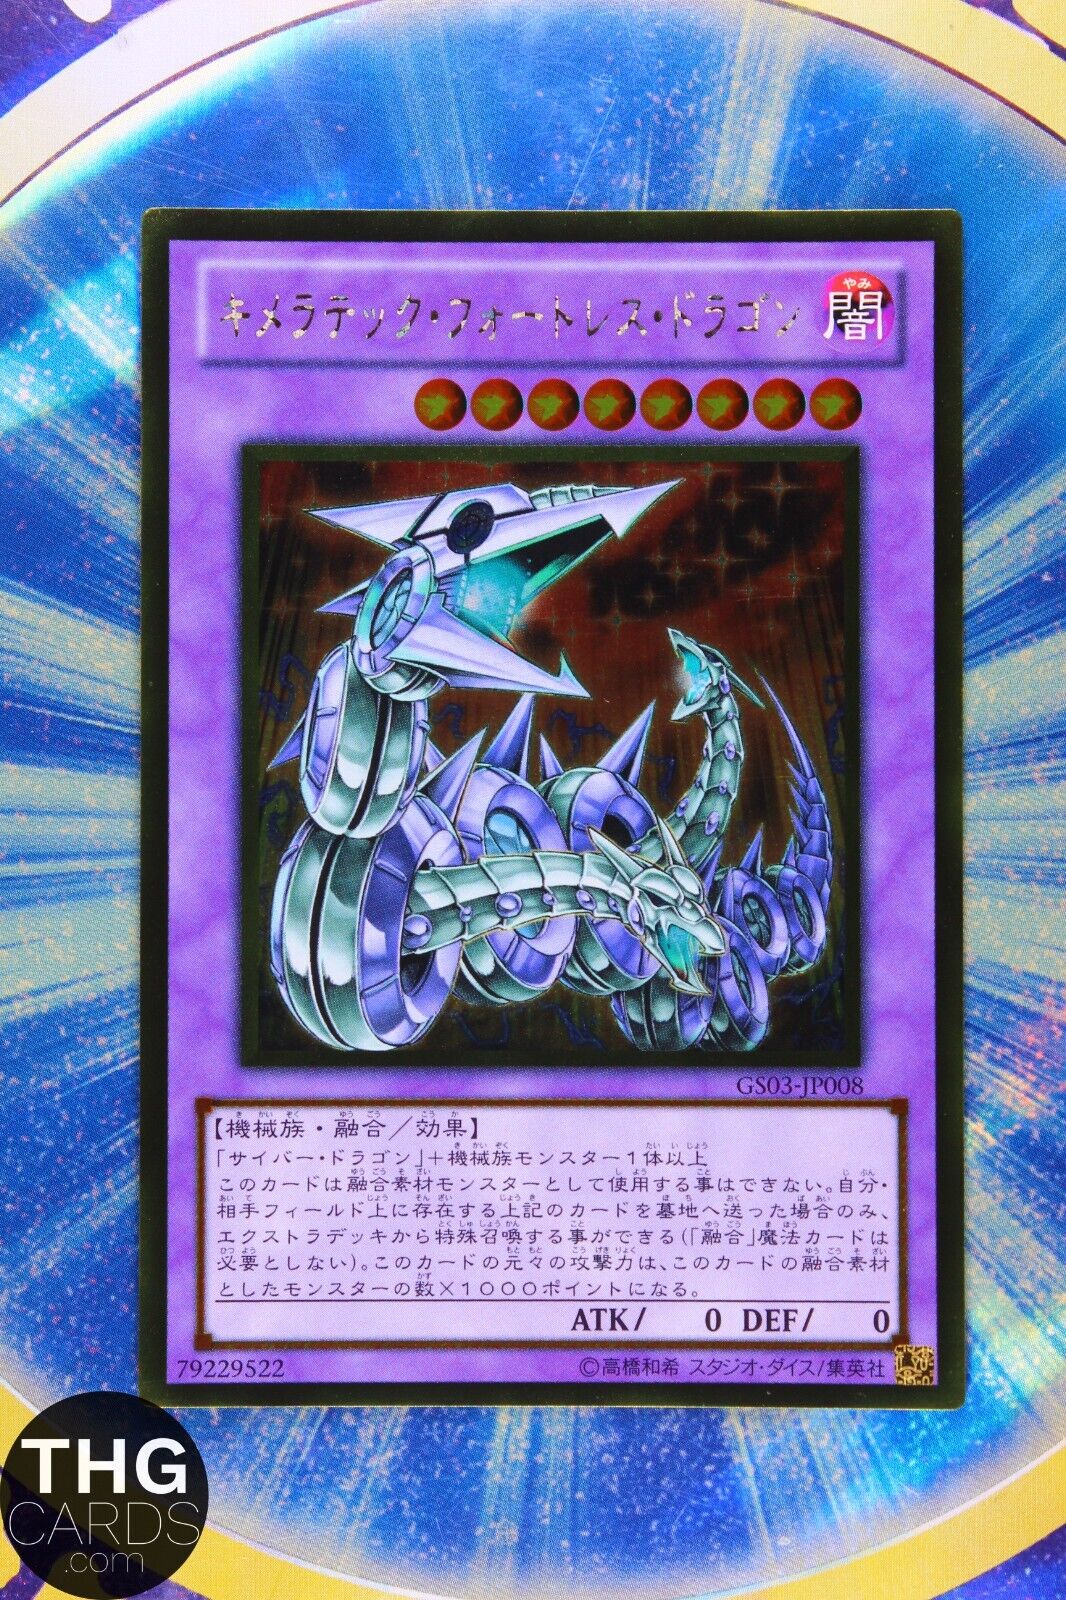 Chimeratech Fortress Dragon GS03-JP008 Gold Ultra Rare Japanese Yugioh Card